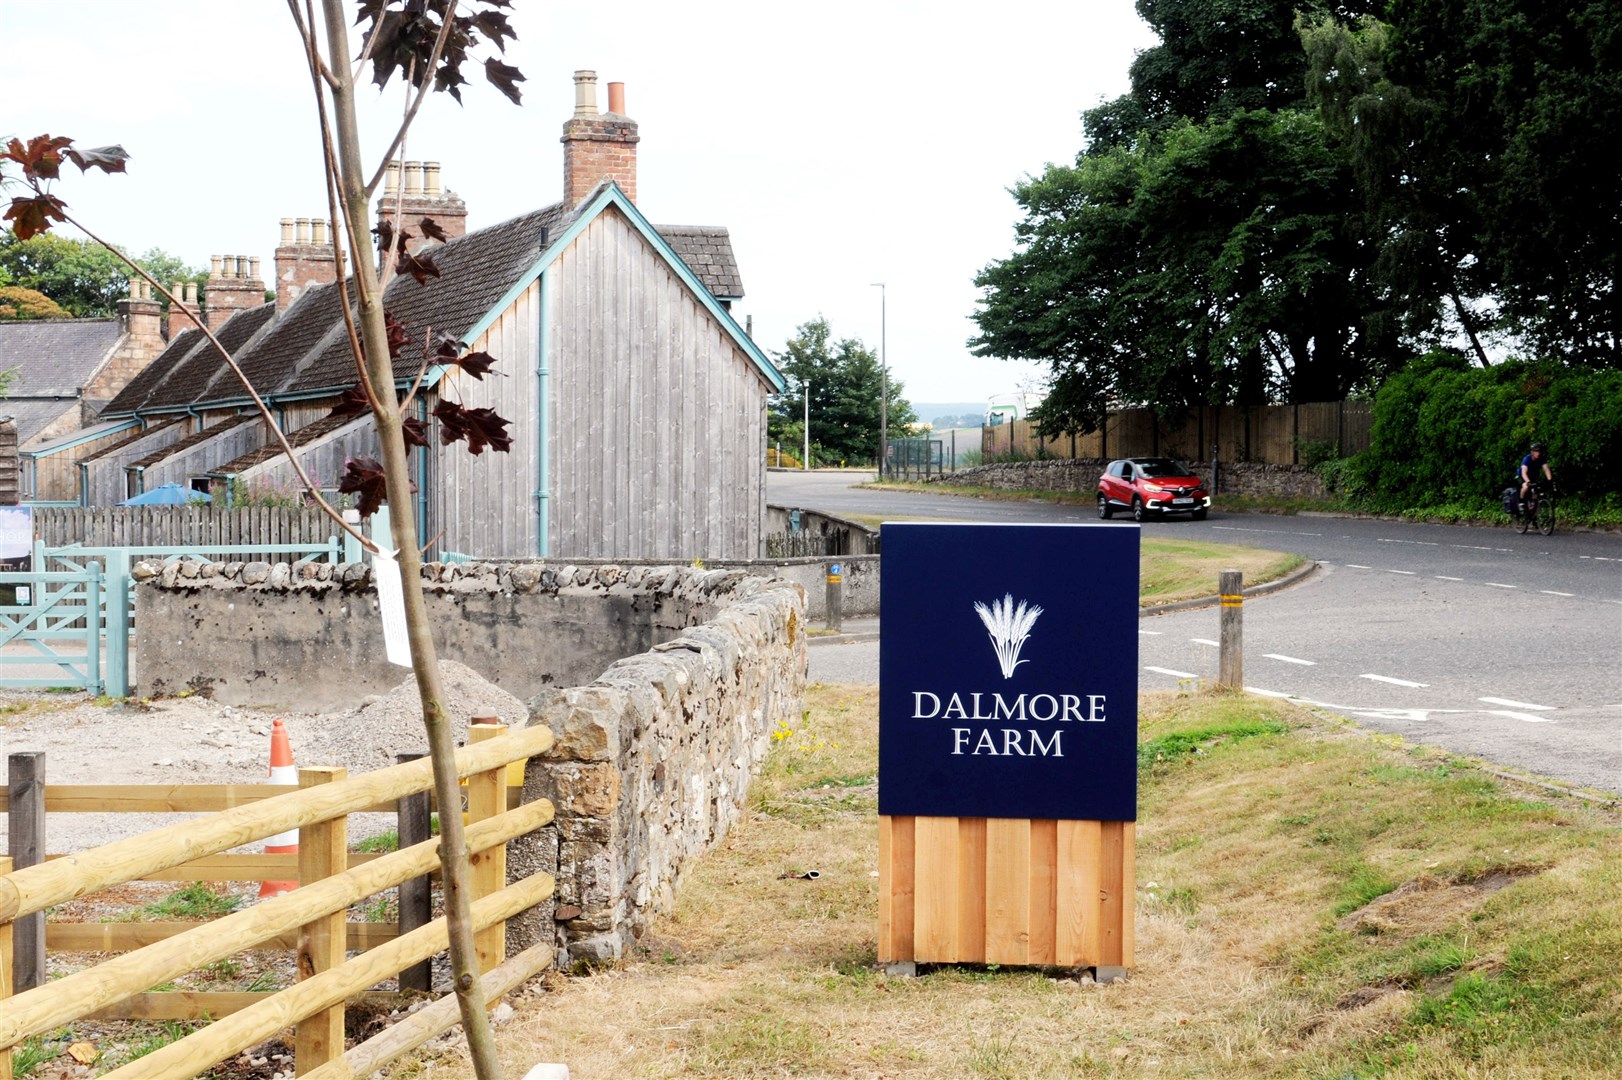 The attempted break-in took place at Dalmore Farm. Picture: James Mackenzie